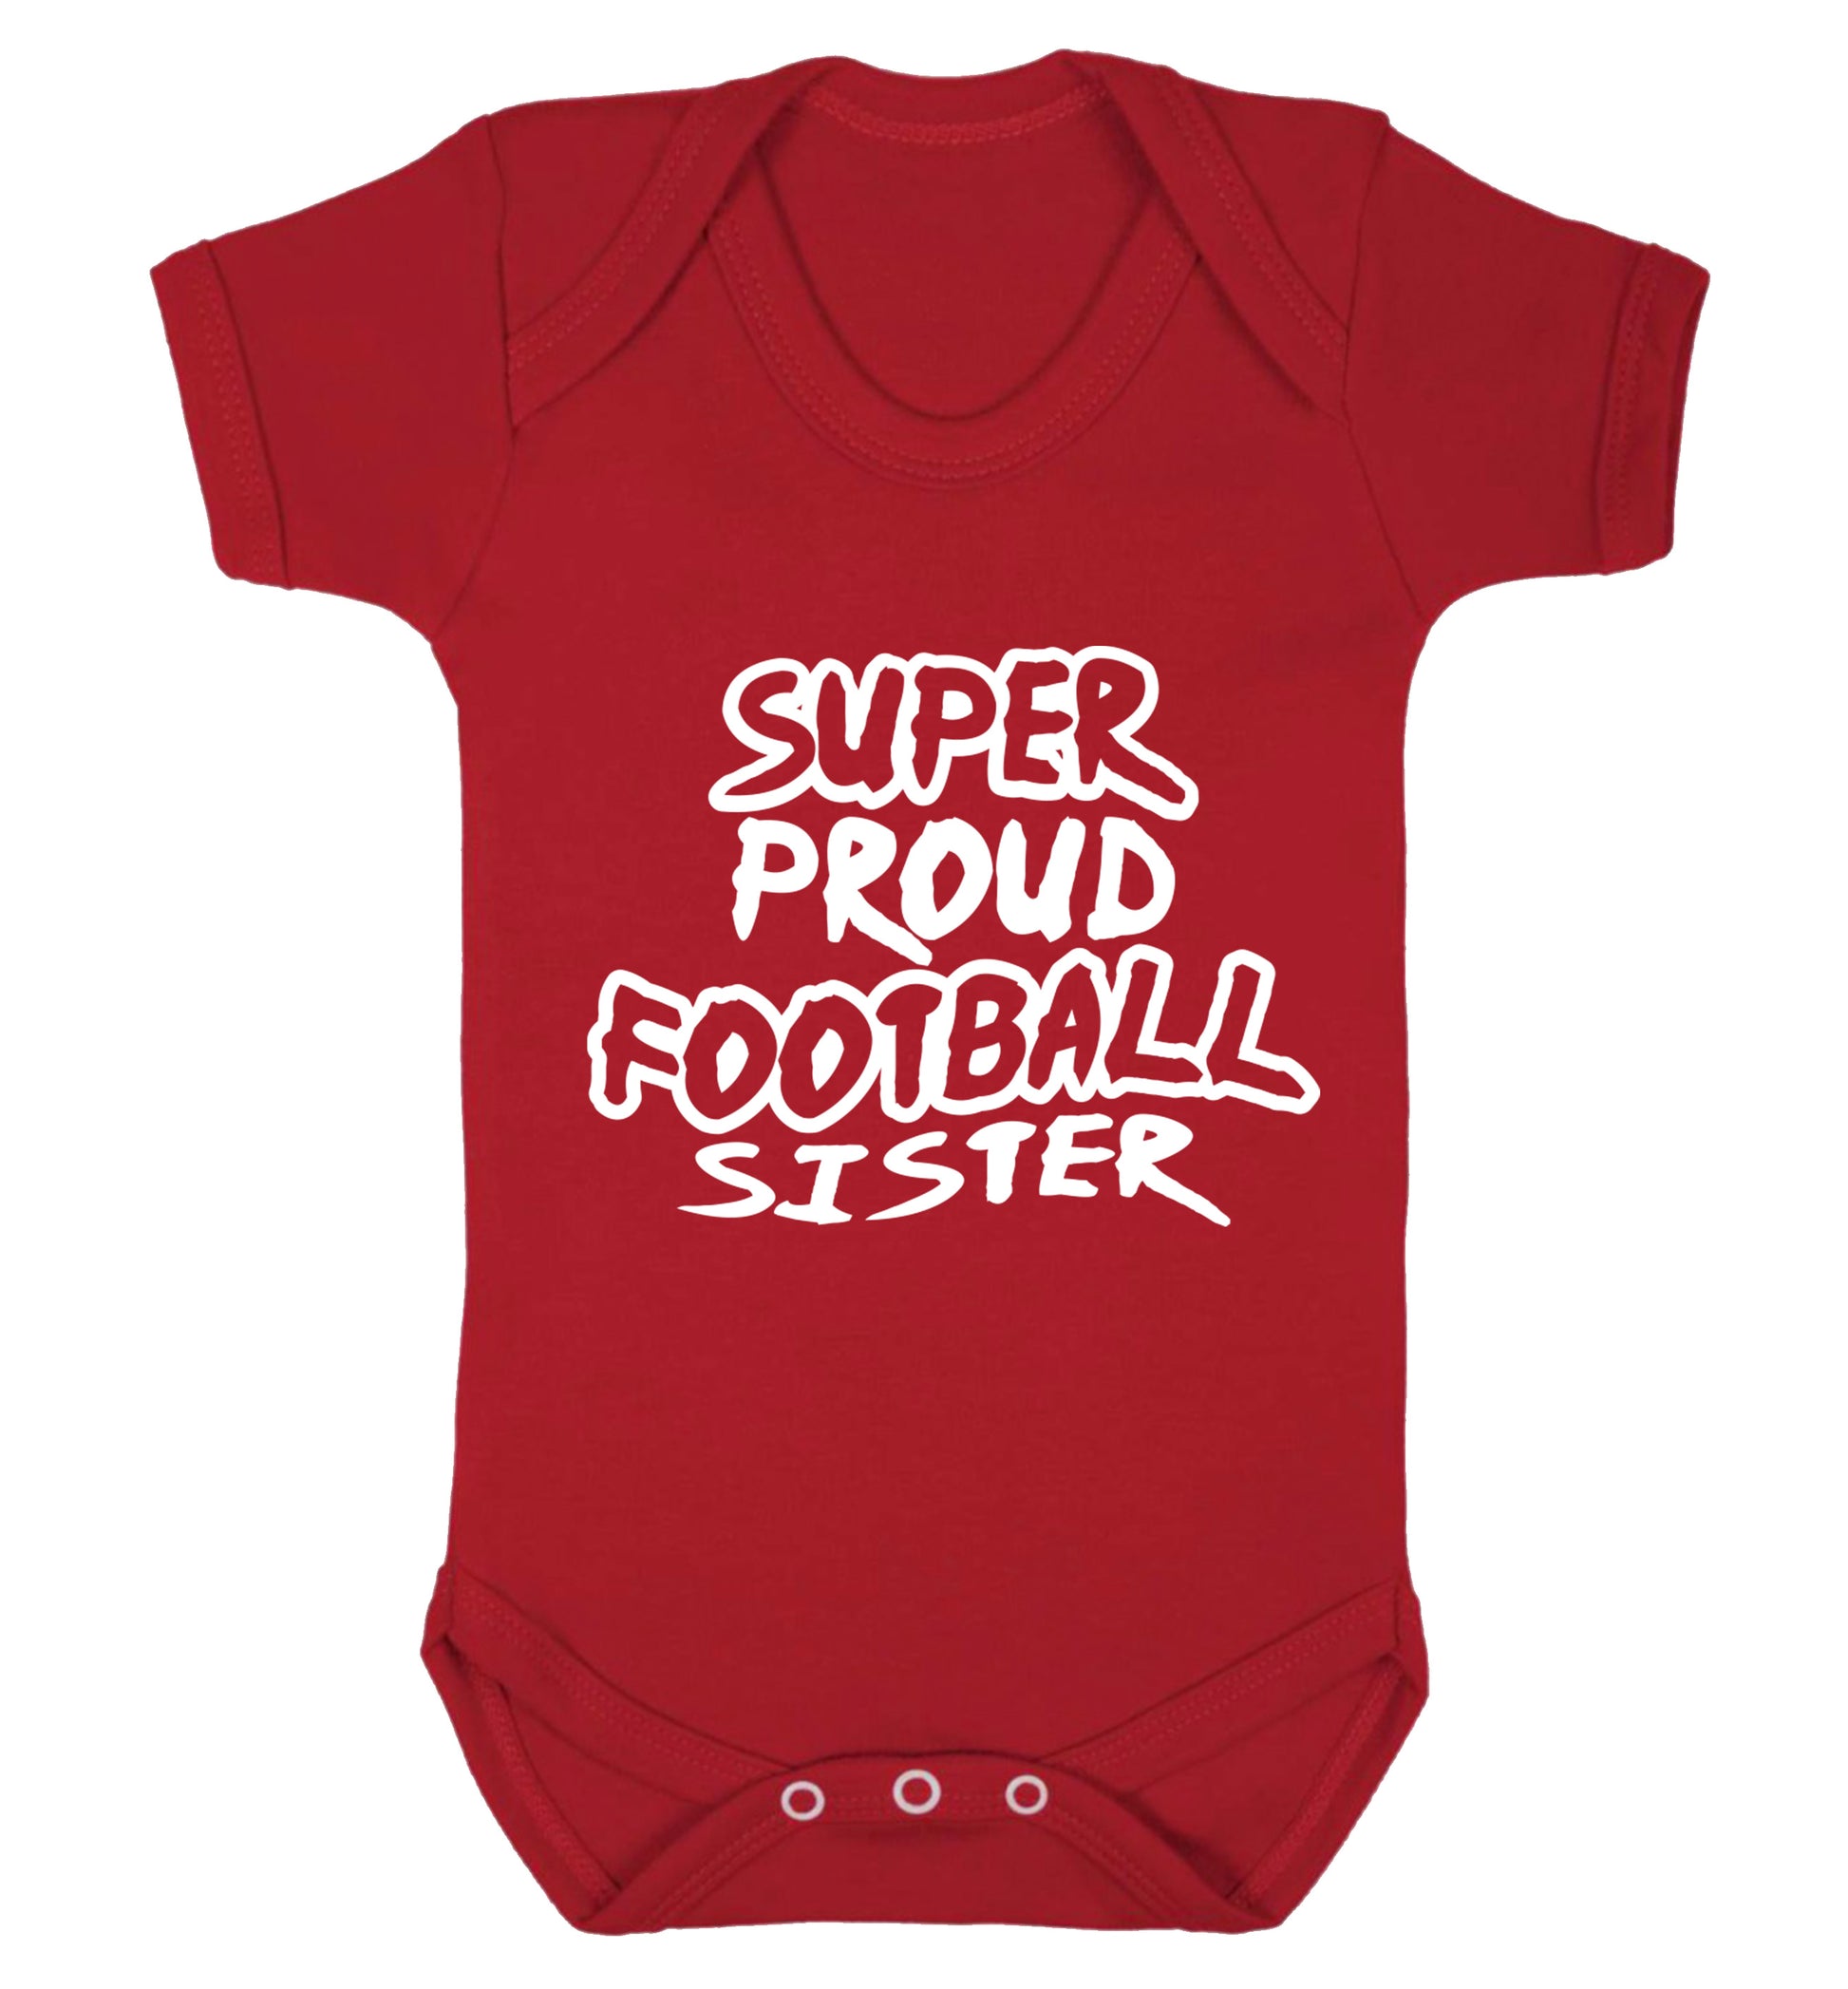 Super proud football sister Baby Vest red 18-24 months